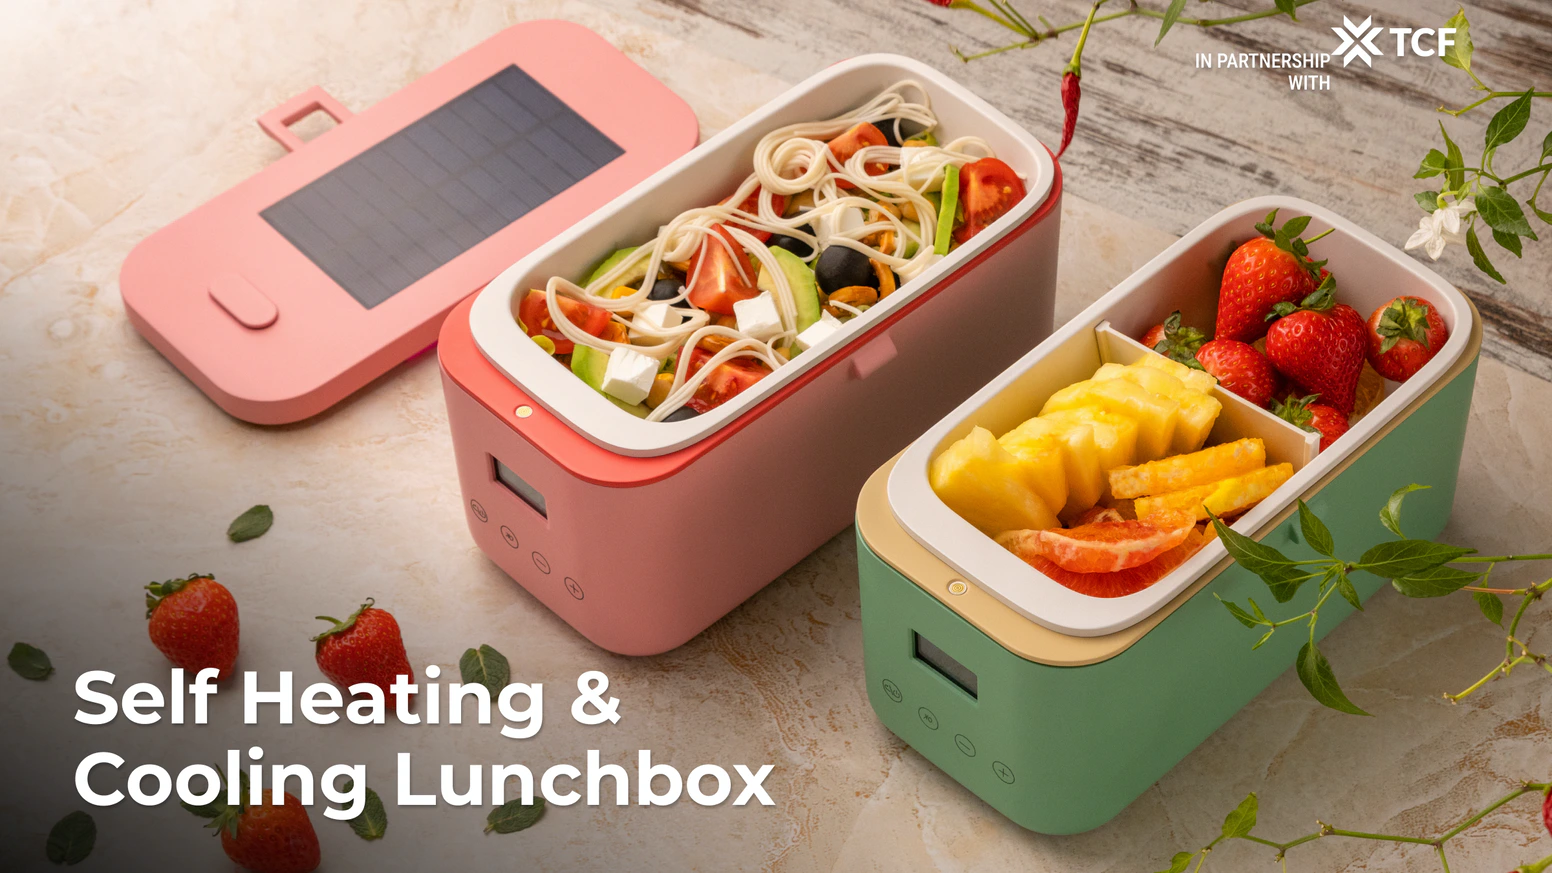 SunnySide lunch box solar-powered heating & cooling